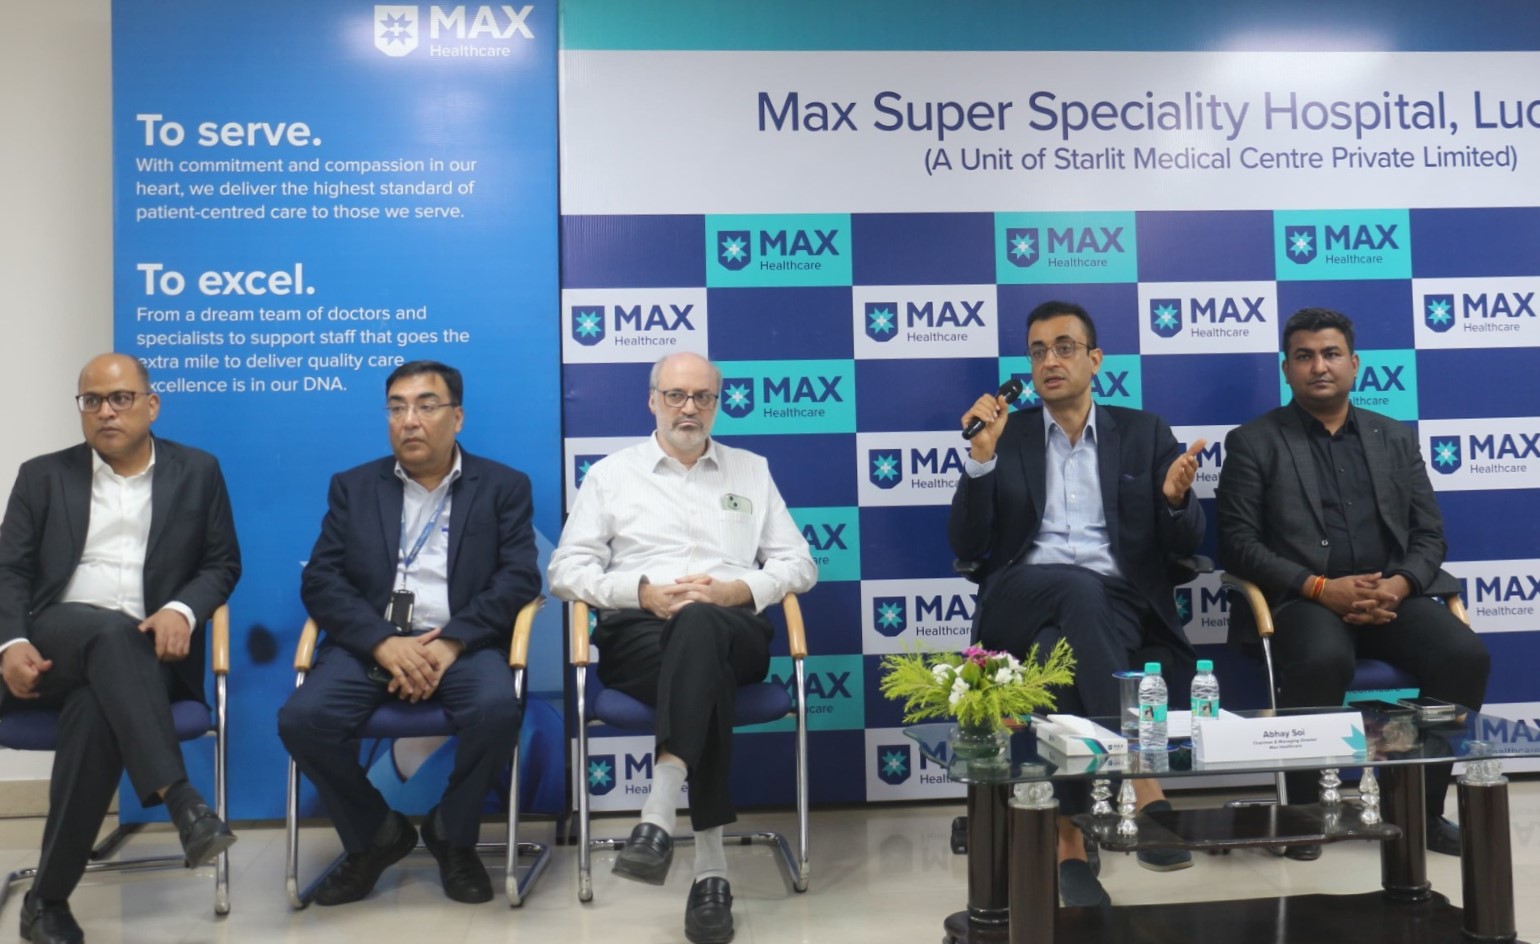 Max Healthcare Announces Investment Plans of INR 2500 Cr in the Capital of Uttar Pradesh